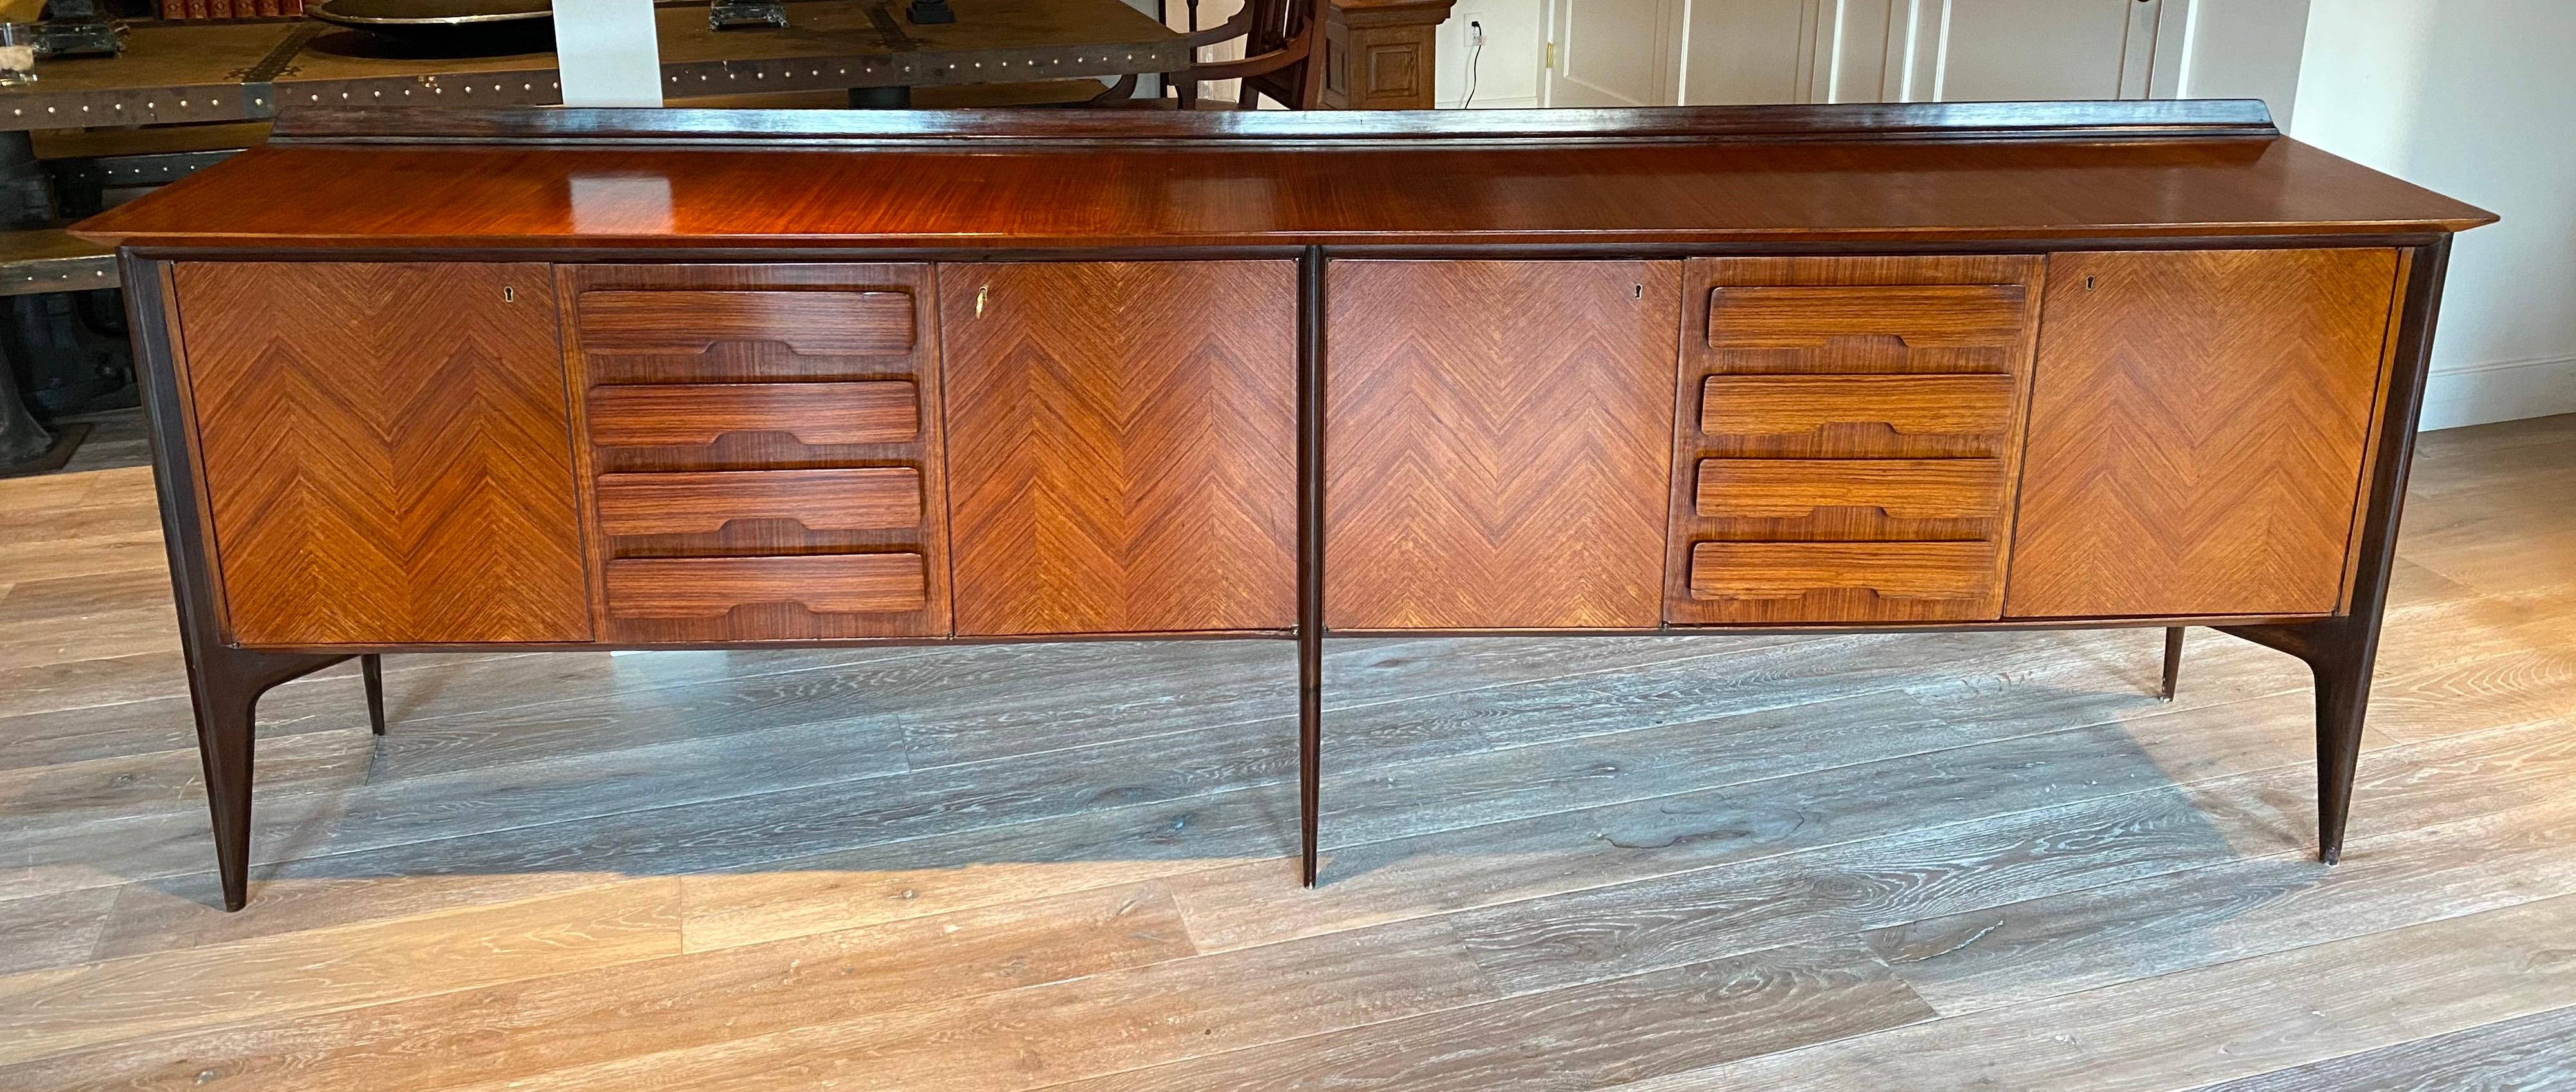 An important sideboard by Italian designer Ico Parisi. Designed in 1948 with structure in walnut wood, ebonized wood and veneered wood. Features herringbone detailing, two series of false drawers and internal drawers with brass handles. Includes